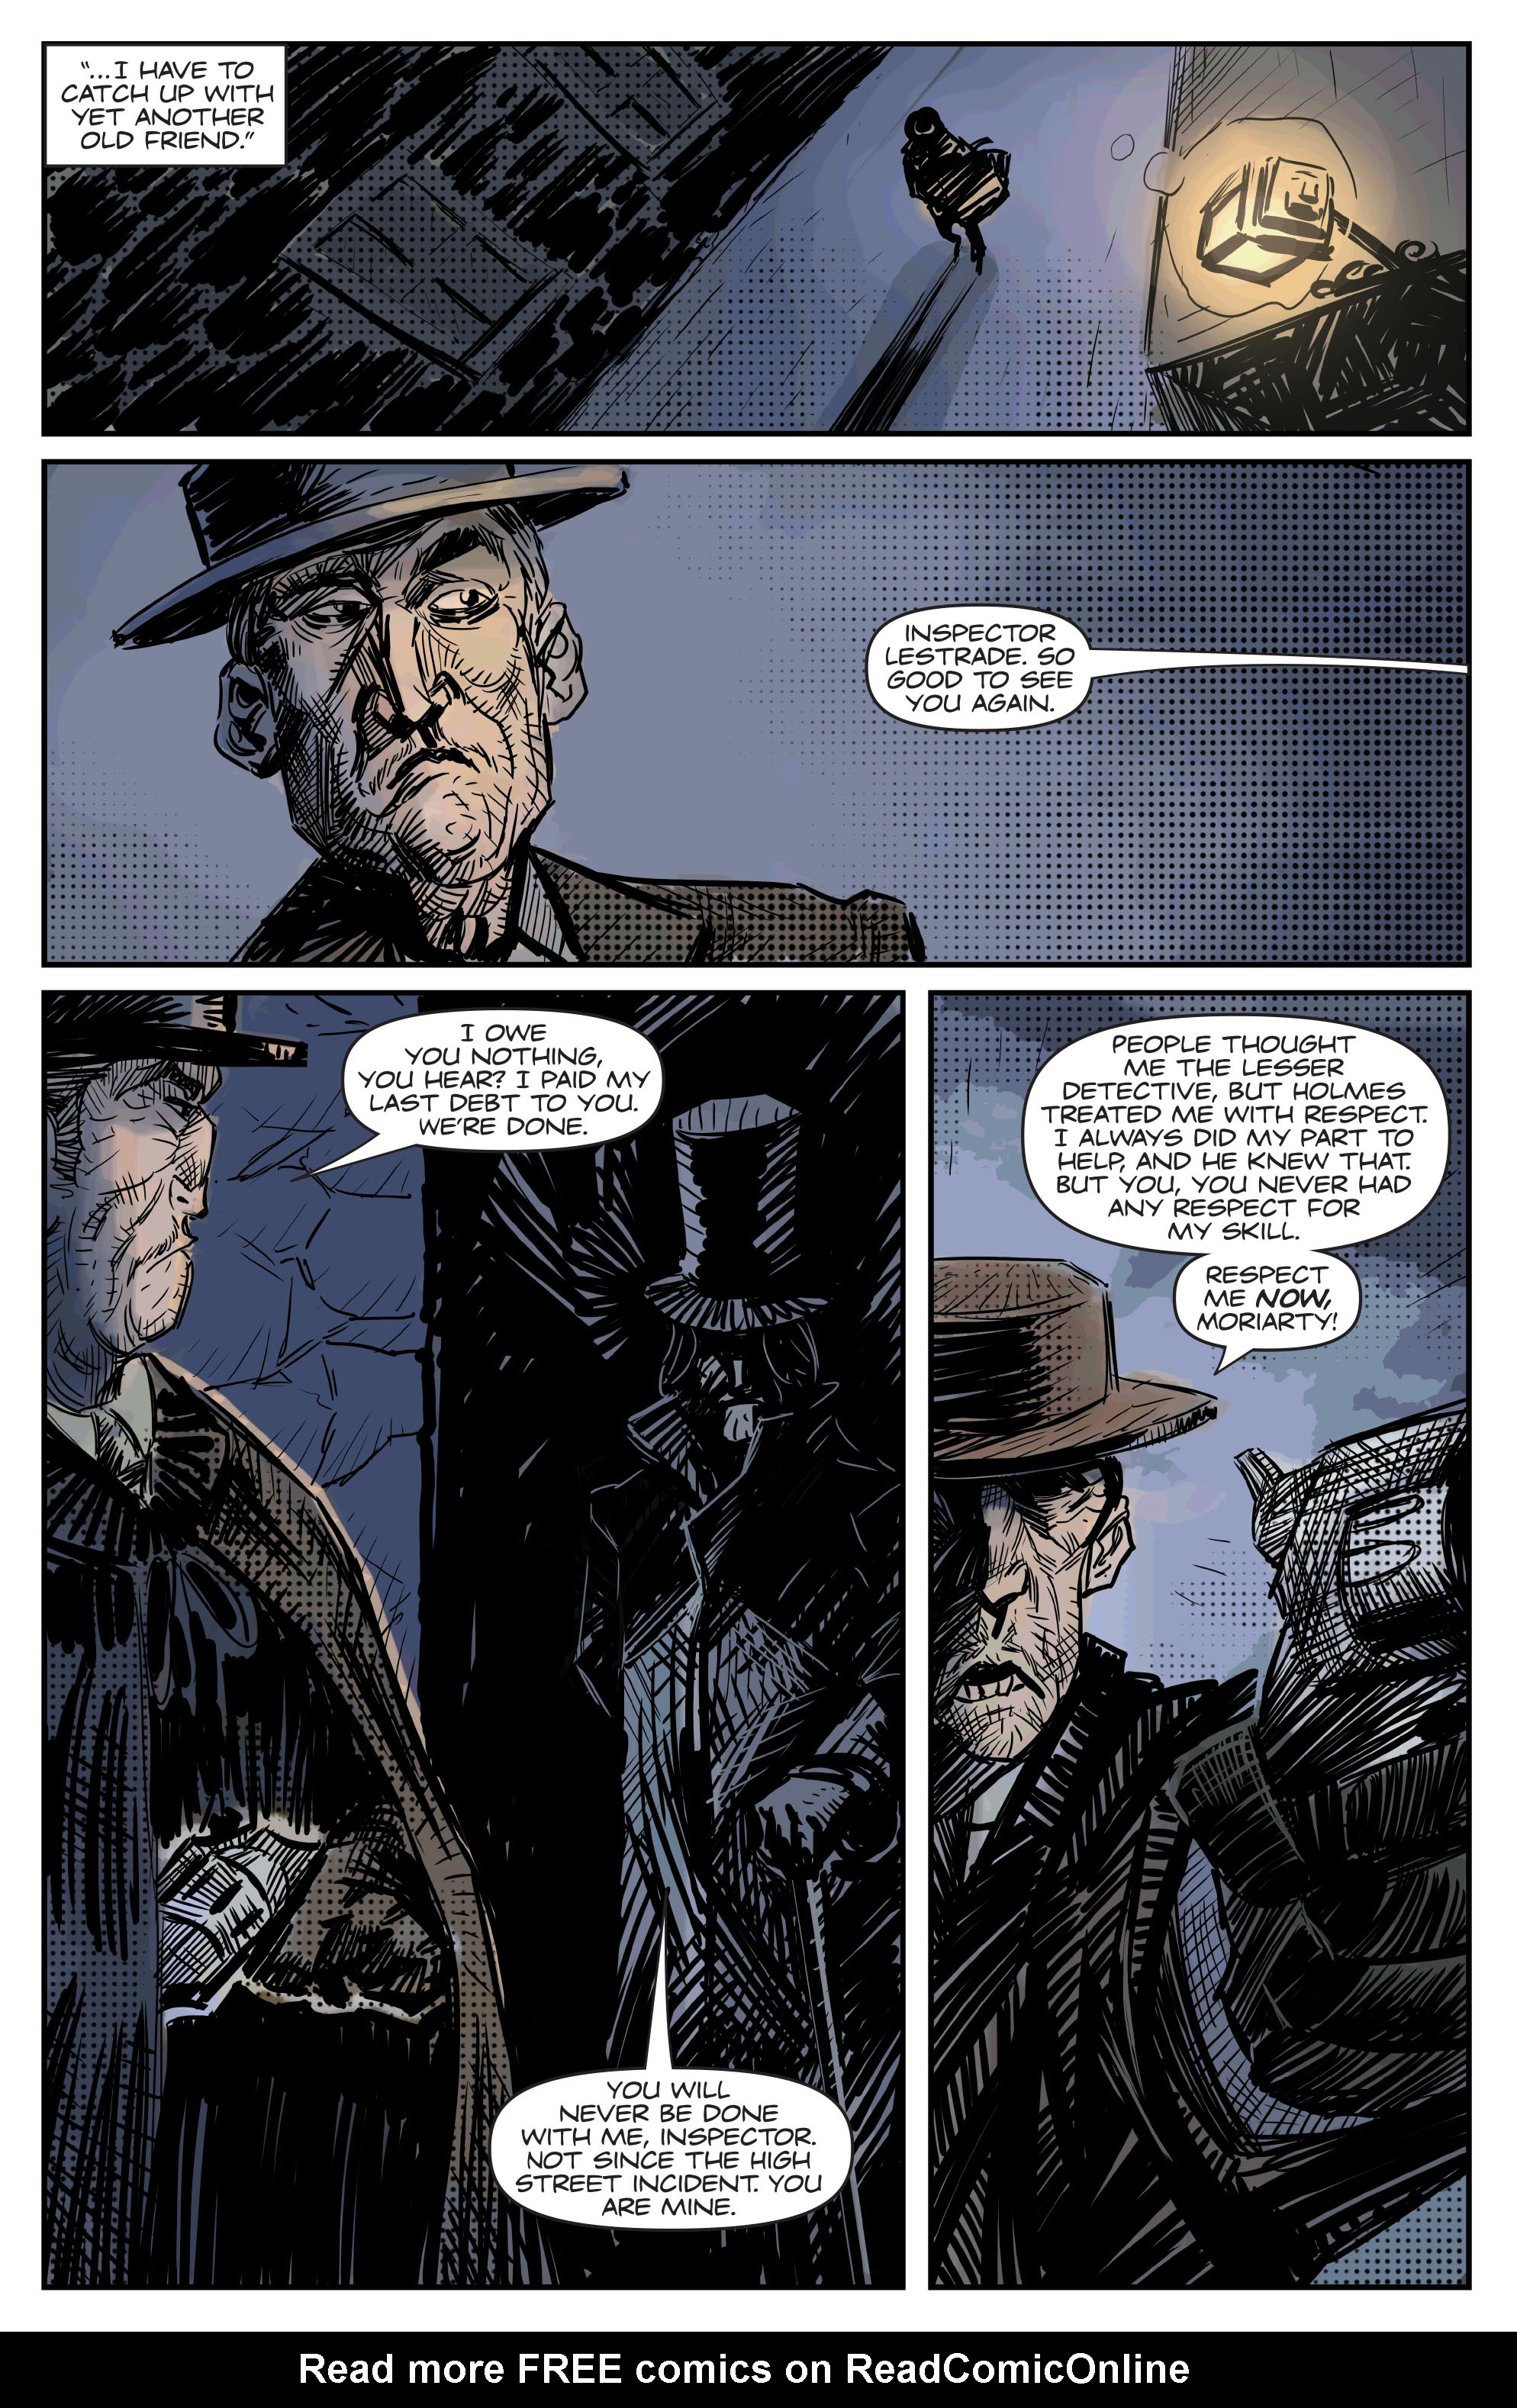 Read online Moriarty comic -  Issue # TPB 1 - 85